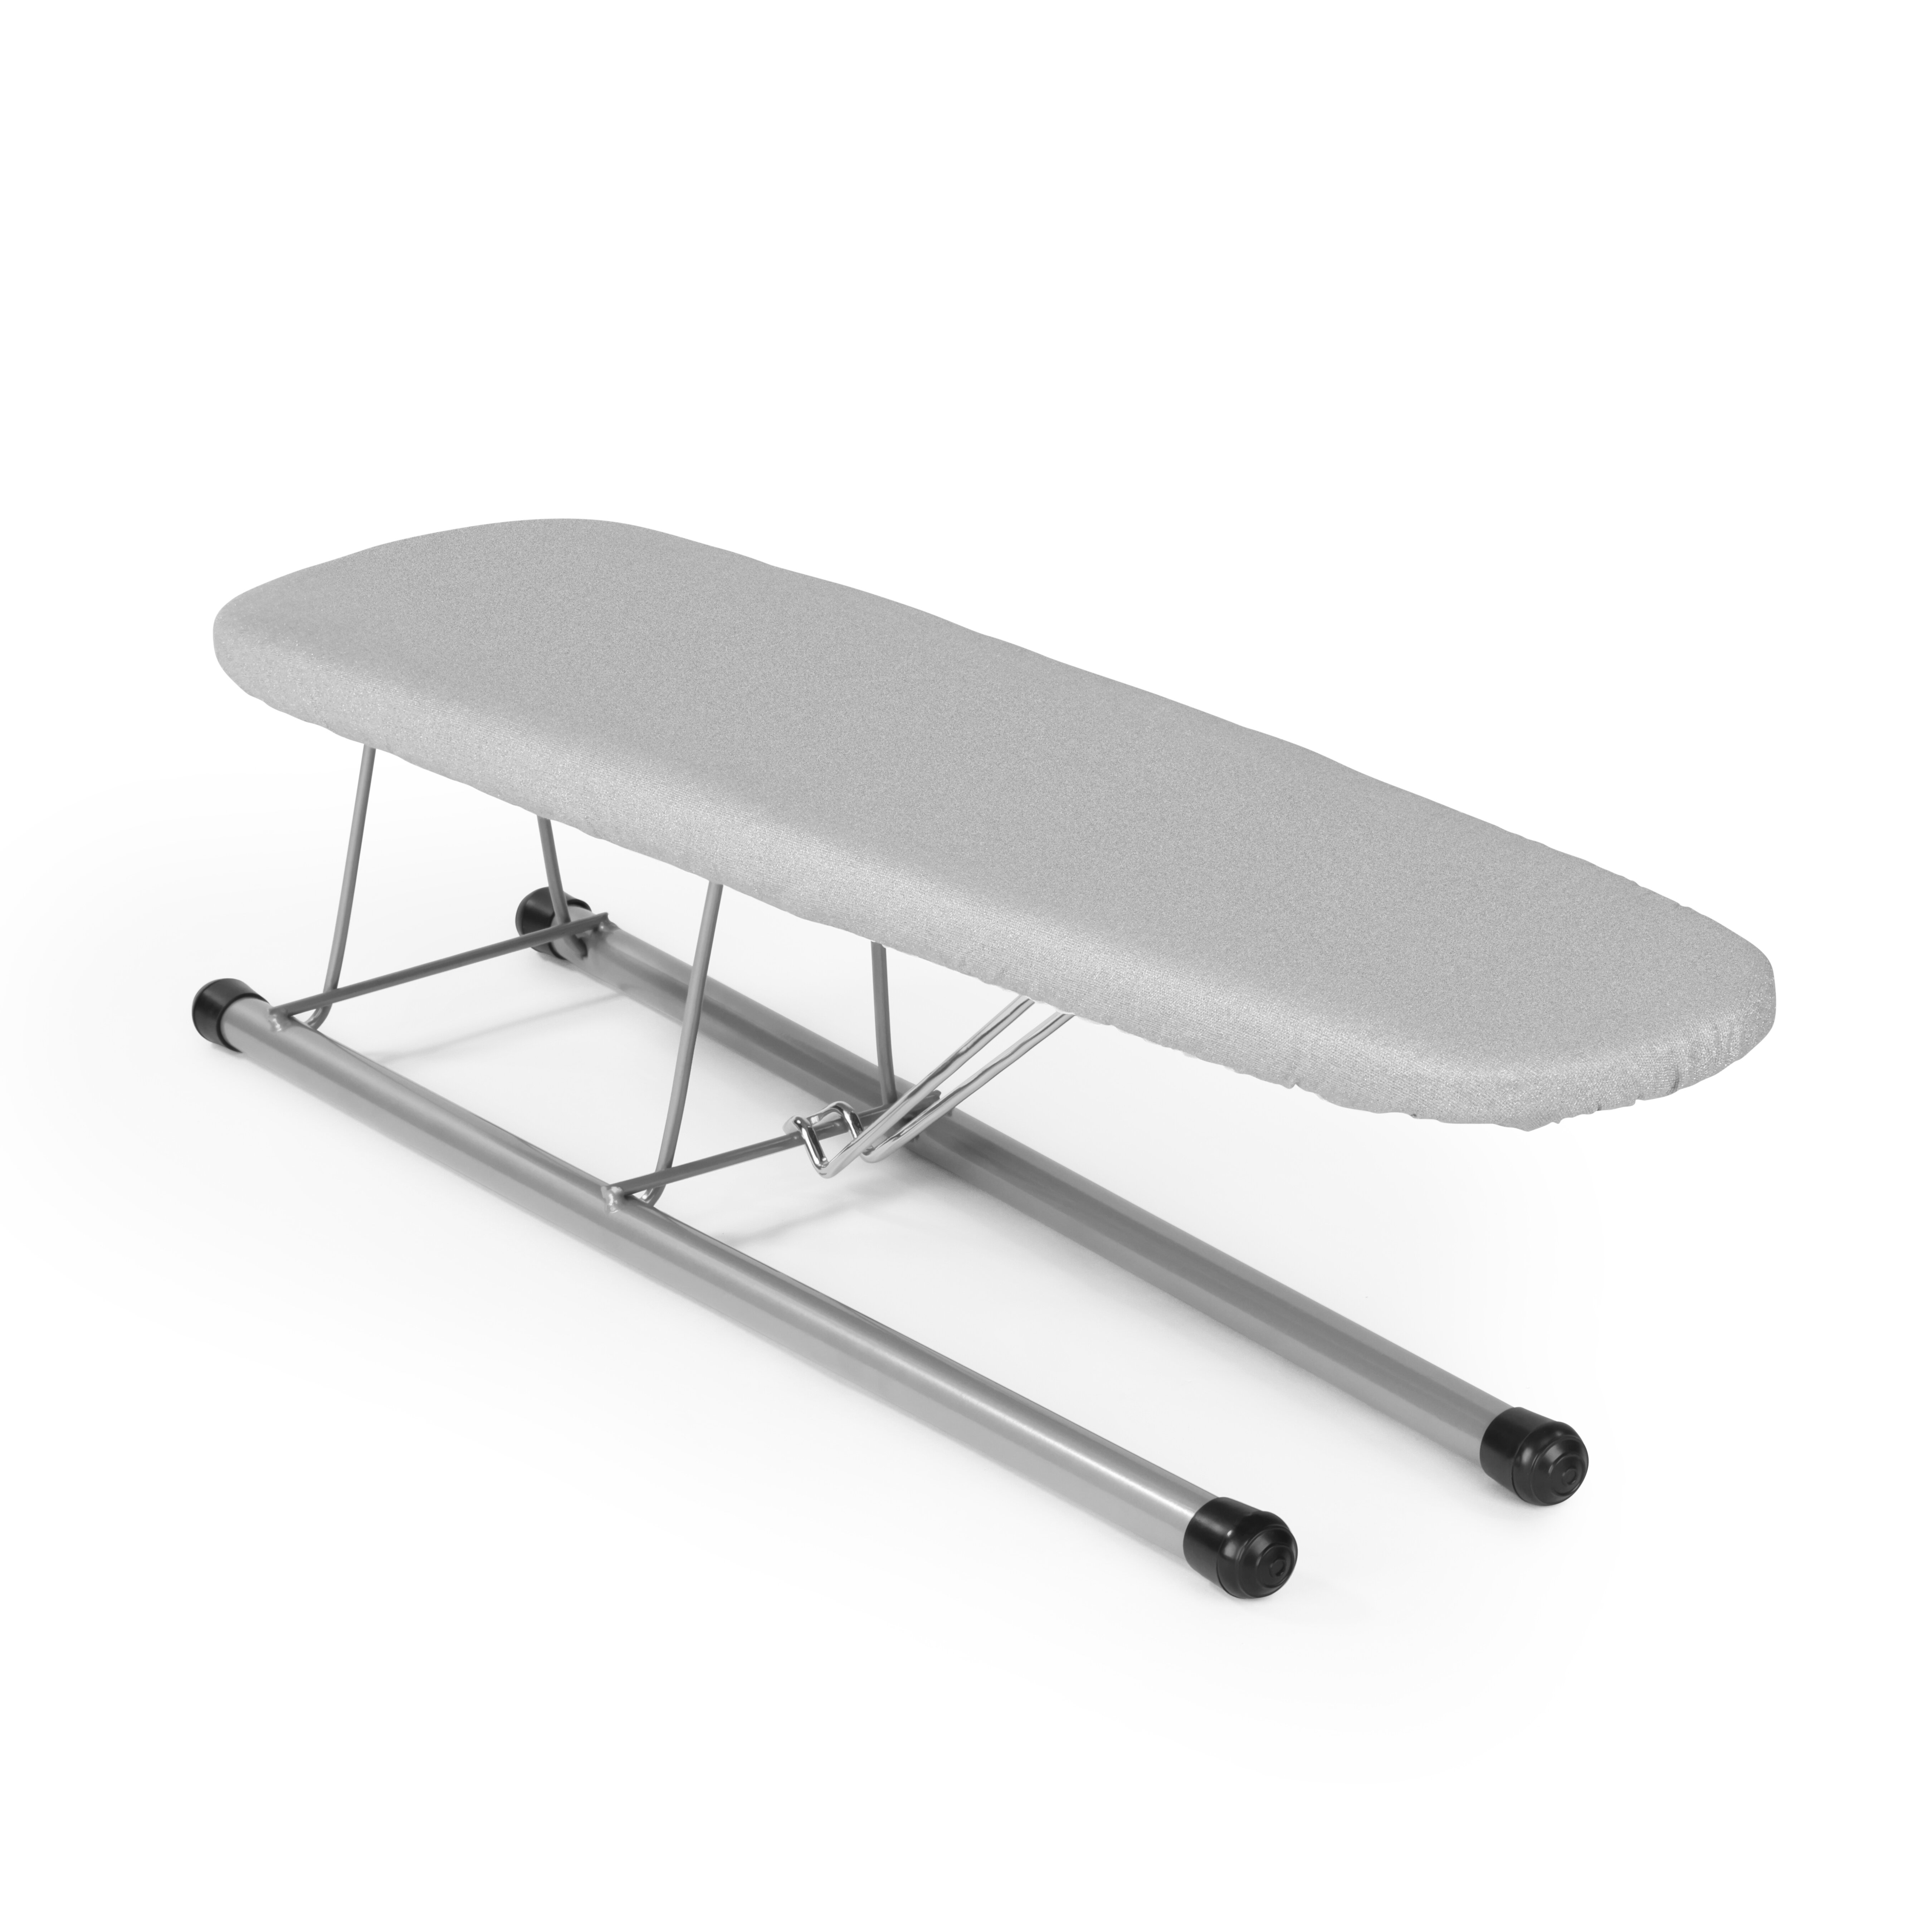 Mini Ironing Board Foldable Sleeve Cuffs Collars Ironing Table For Home  Travel Usefashion Square Grid